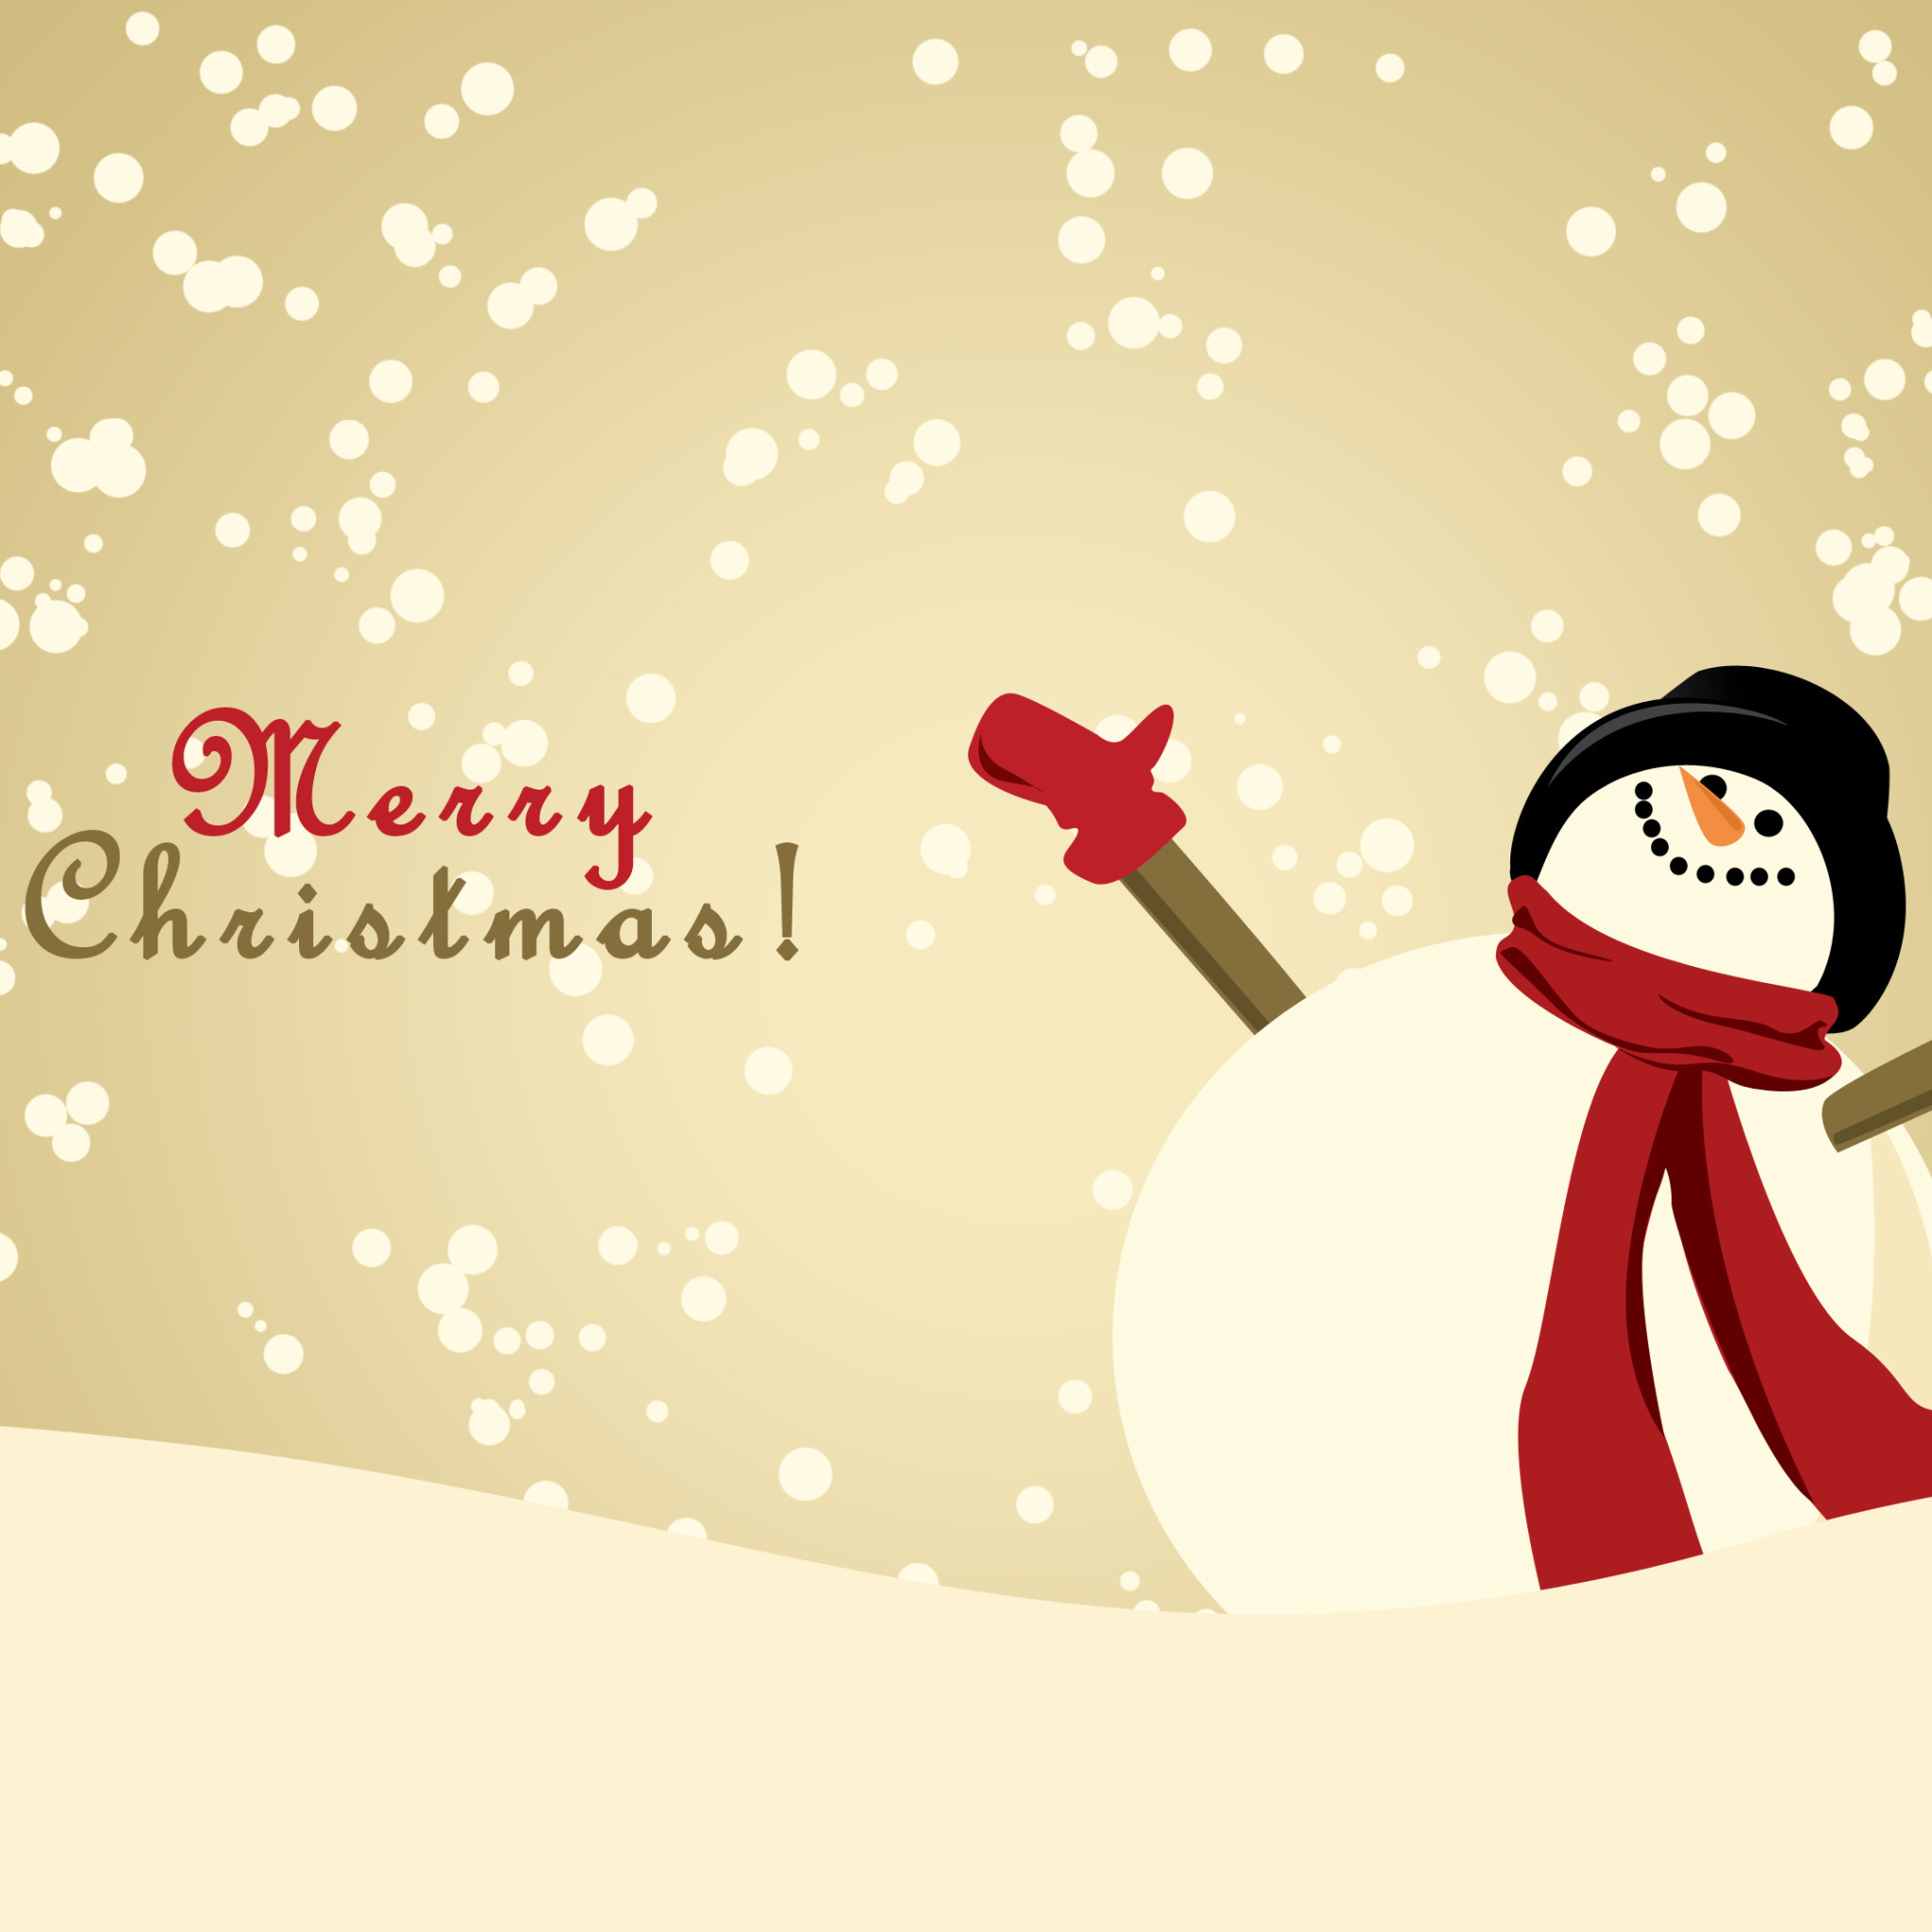 Das Merry Christmas Wishes from Snowman Wallpaper 2048x2048